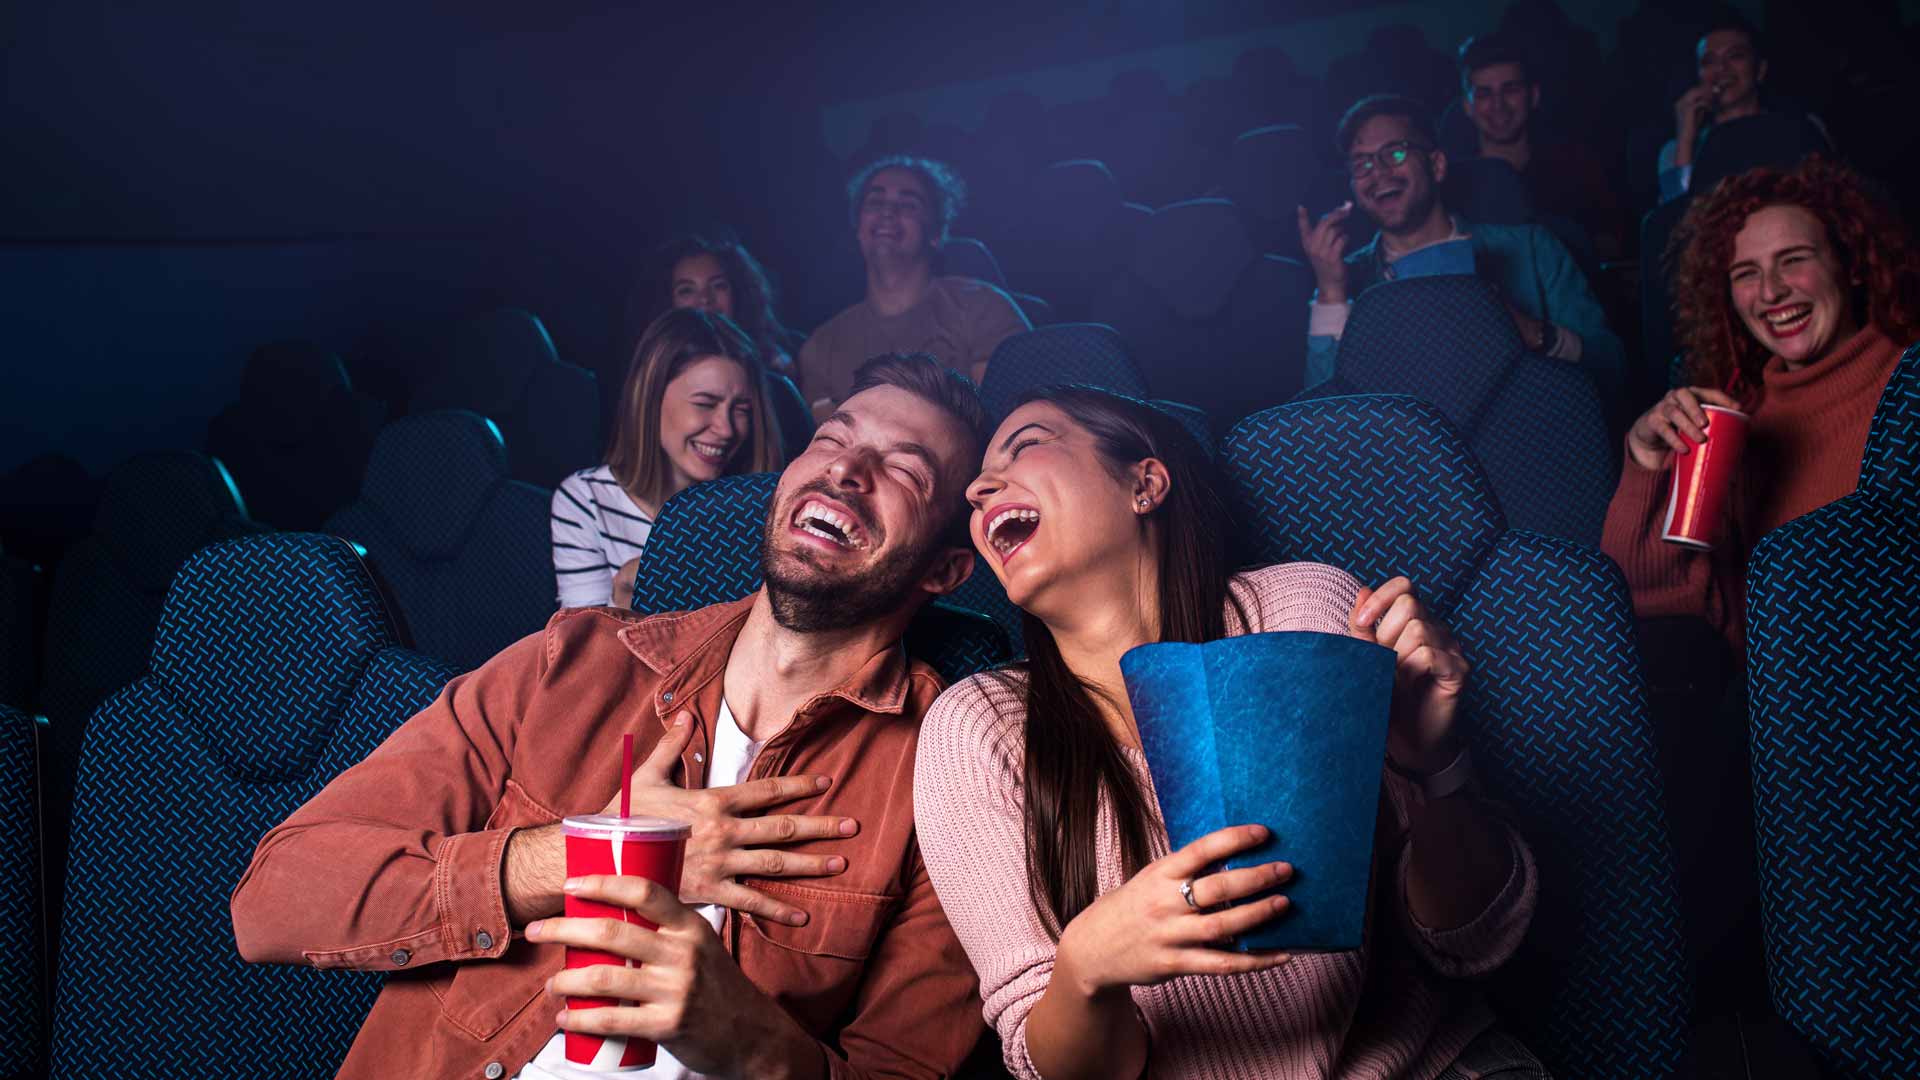 Watching films at the Cinema or at Home. They like going to the cinema